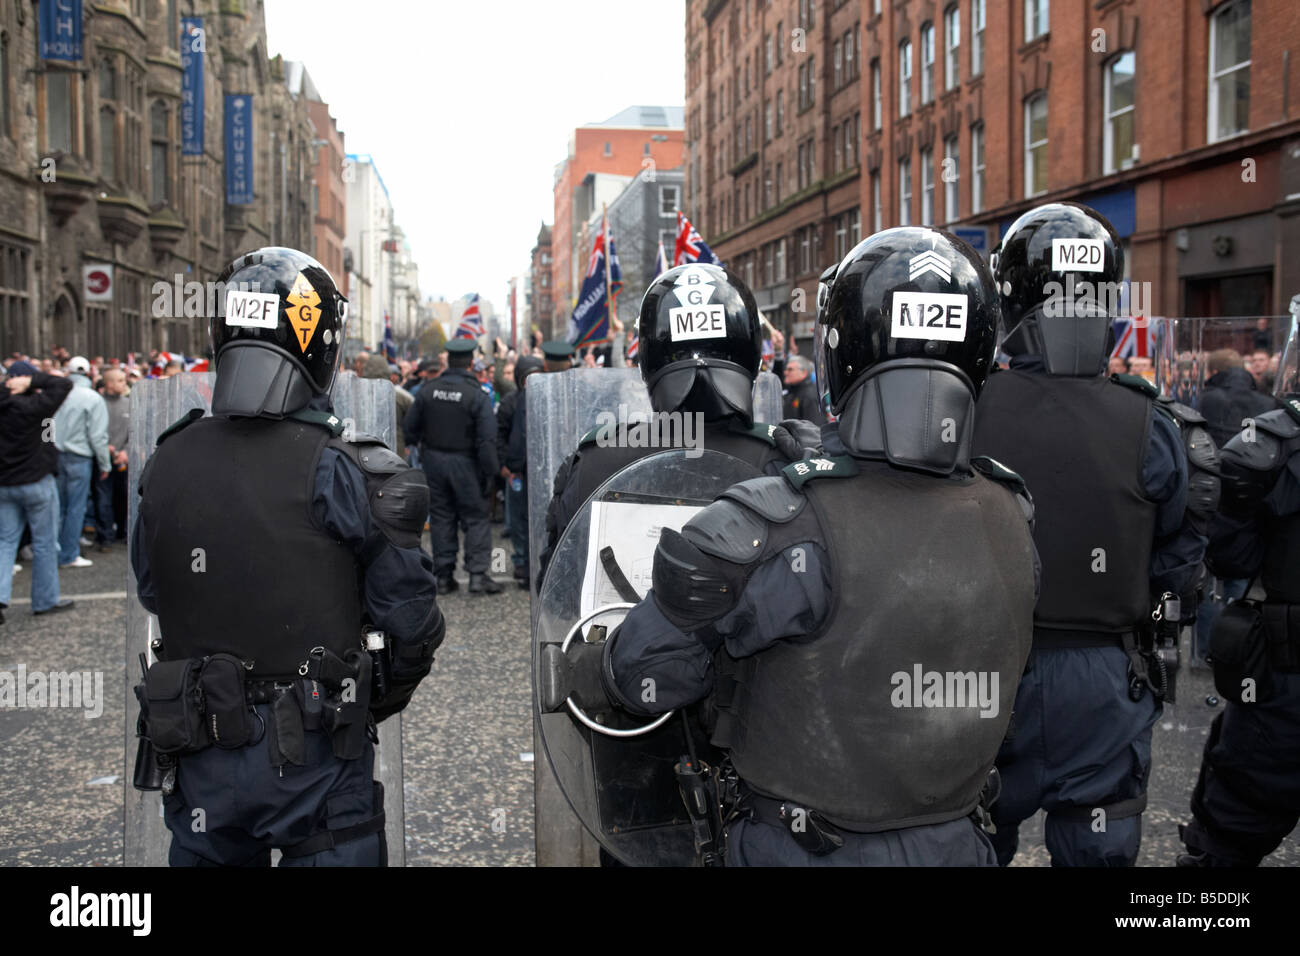 PSNI Police Service of Northern Ireland riot control officers standing guarding during loyalist protest parade belfast city centre northern ireland Stock Photo